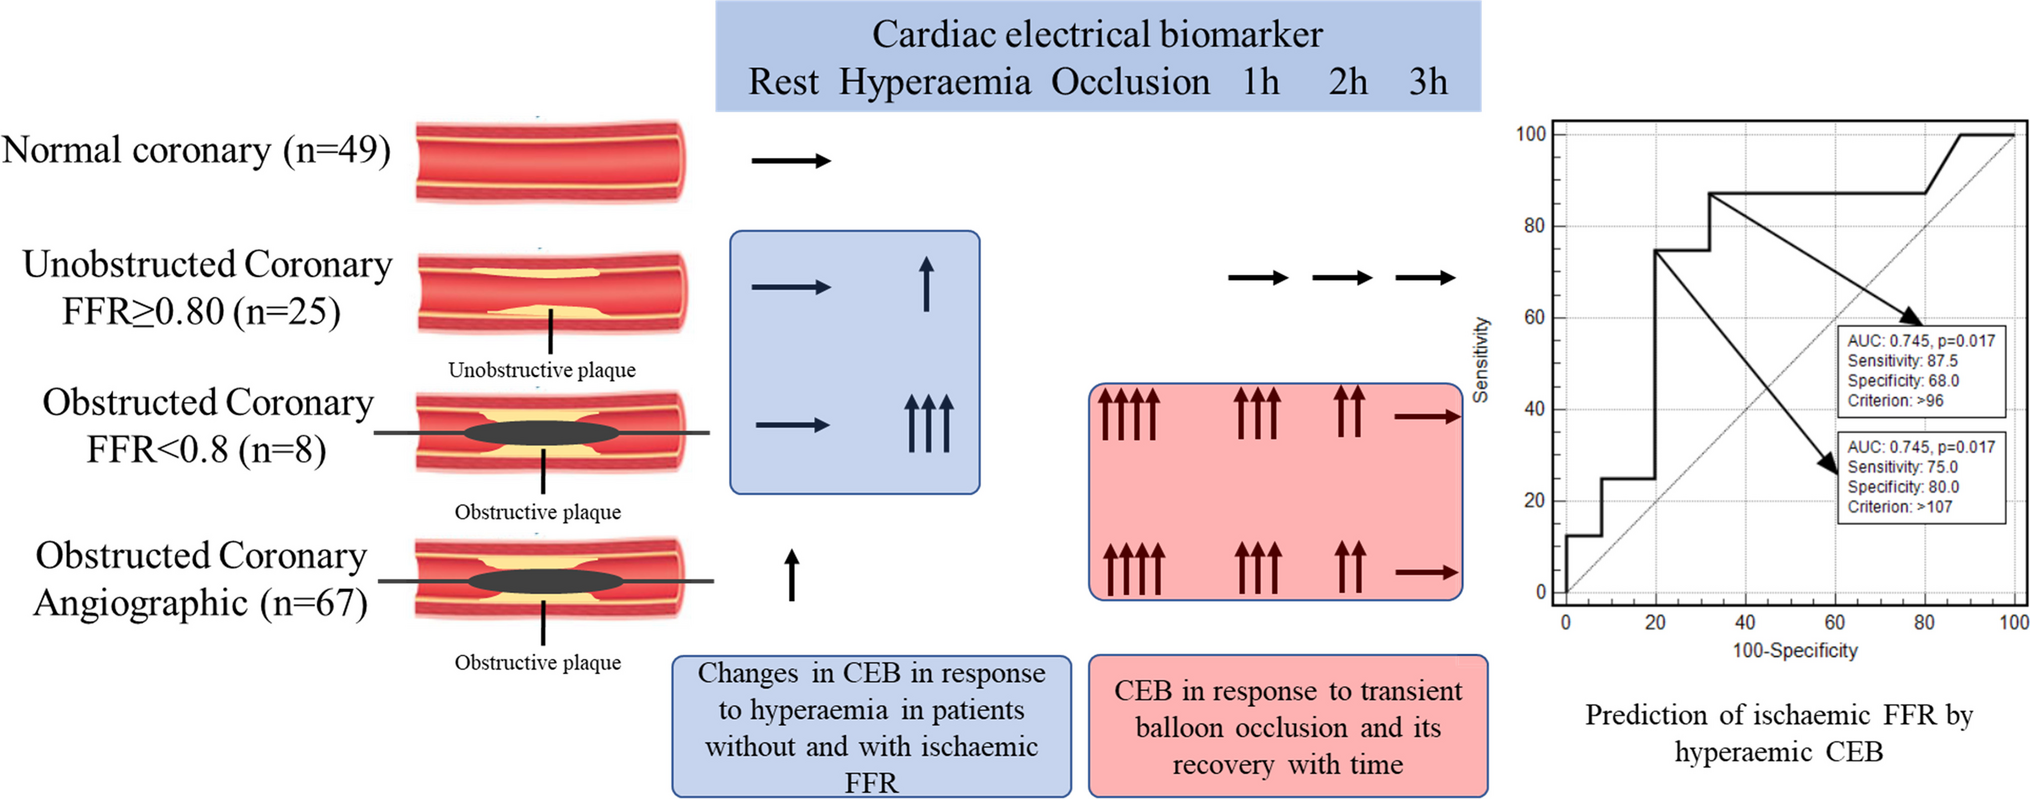 Changes in Cardiac Electrical Biomarker in Response to Coronary Arterial Occlusion: An Experimental Observation